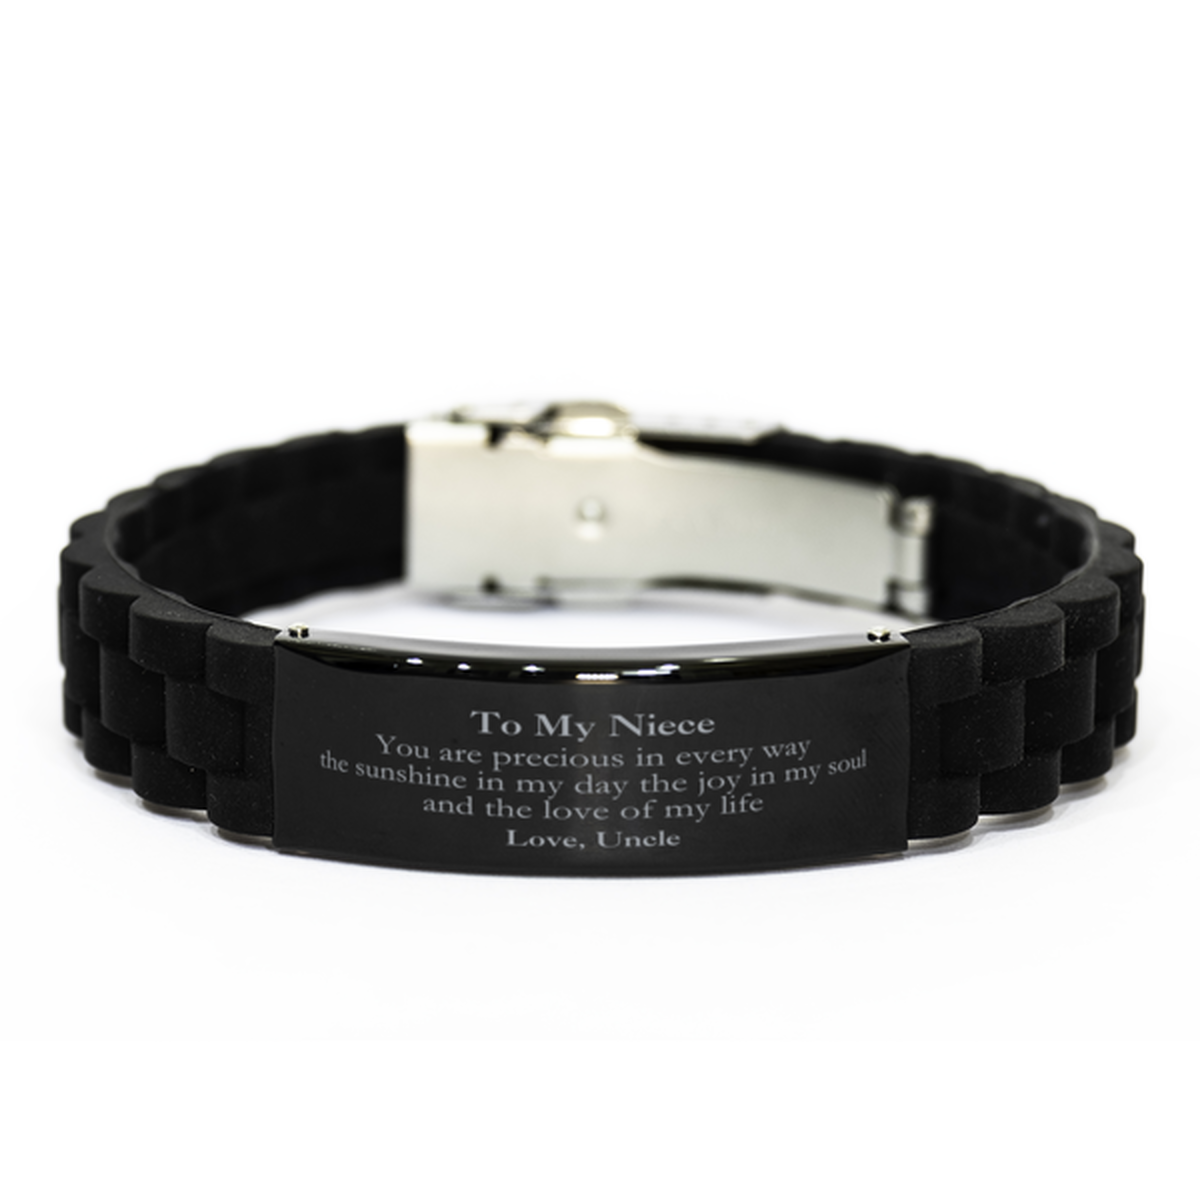 Graduation Gifts for Niece Black Glidelock Clasp Bracelet Present from Uncle, Christmas Niece Birthday Gifts Niece You are precious in every way the sunshine in my day. Love, Uncle